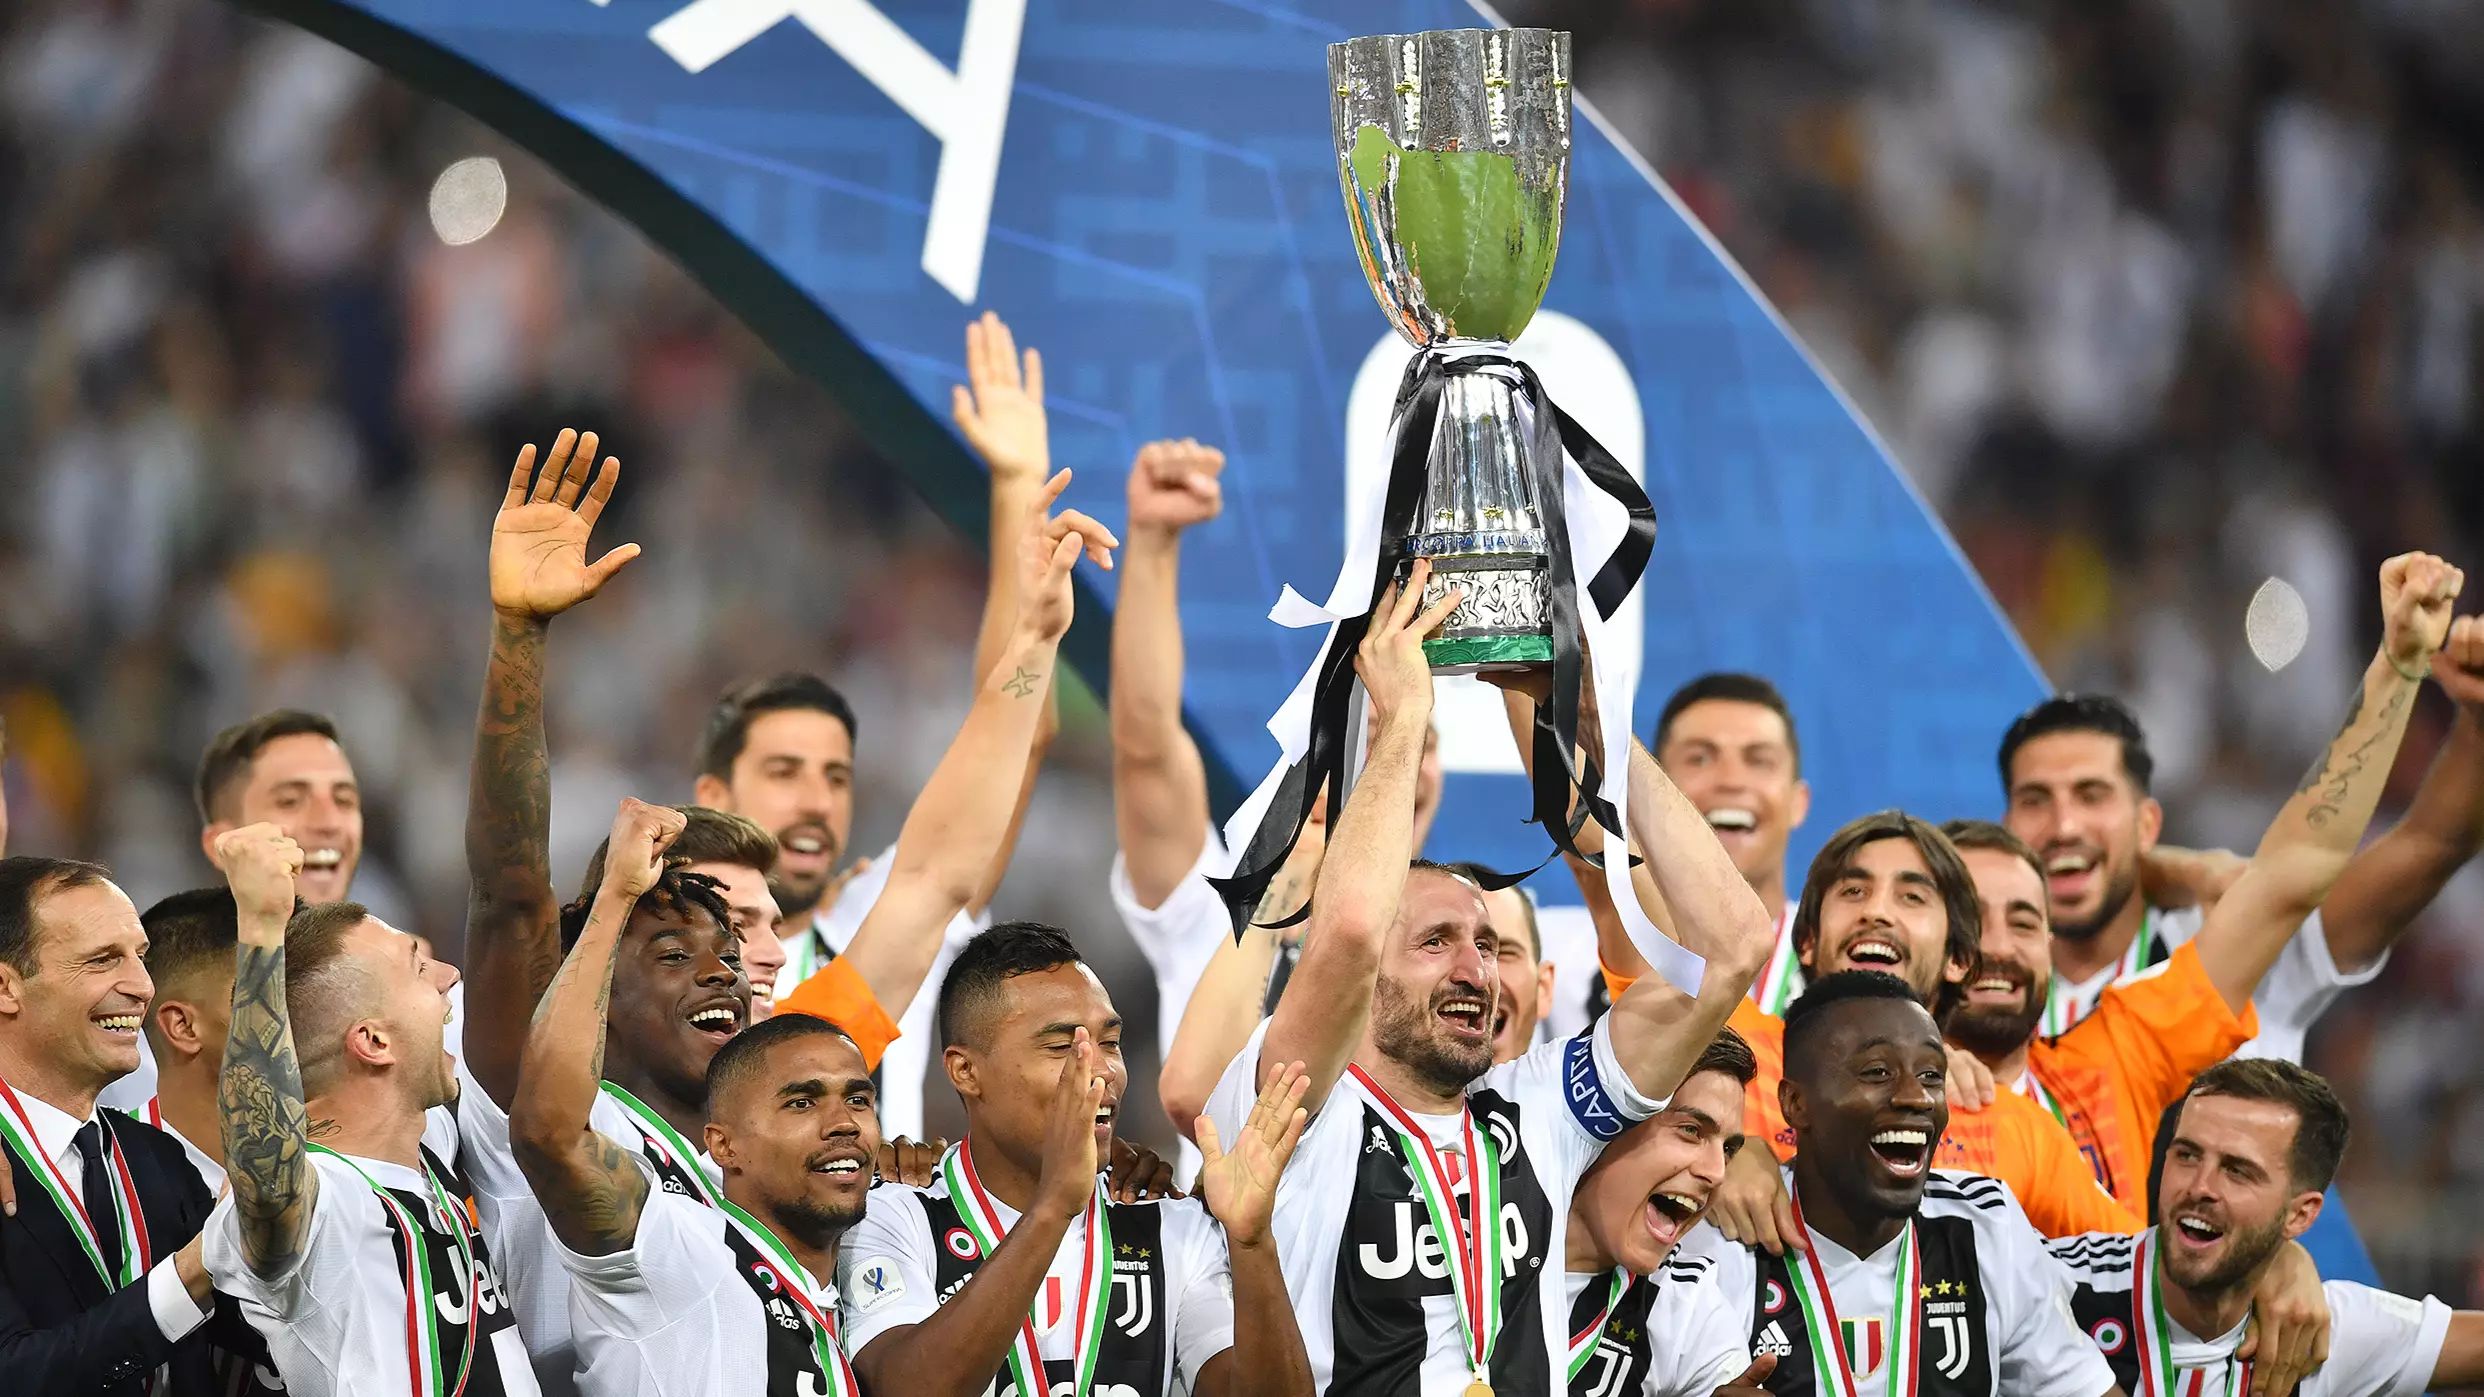 Juventus Want To Change Kick-Off Time So They Can Have Night-Time Title Party Against Atalanta